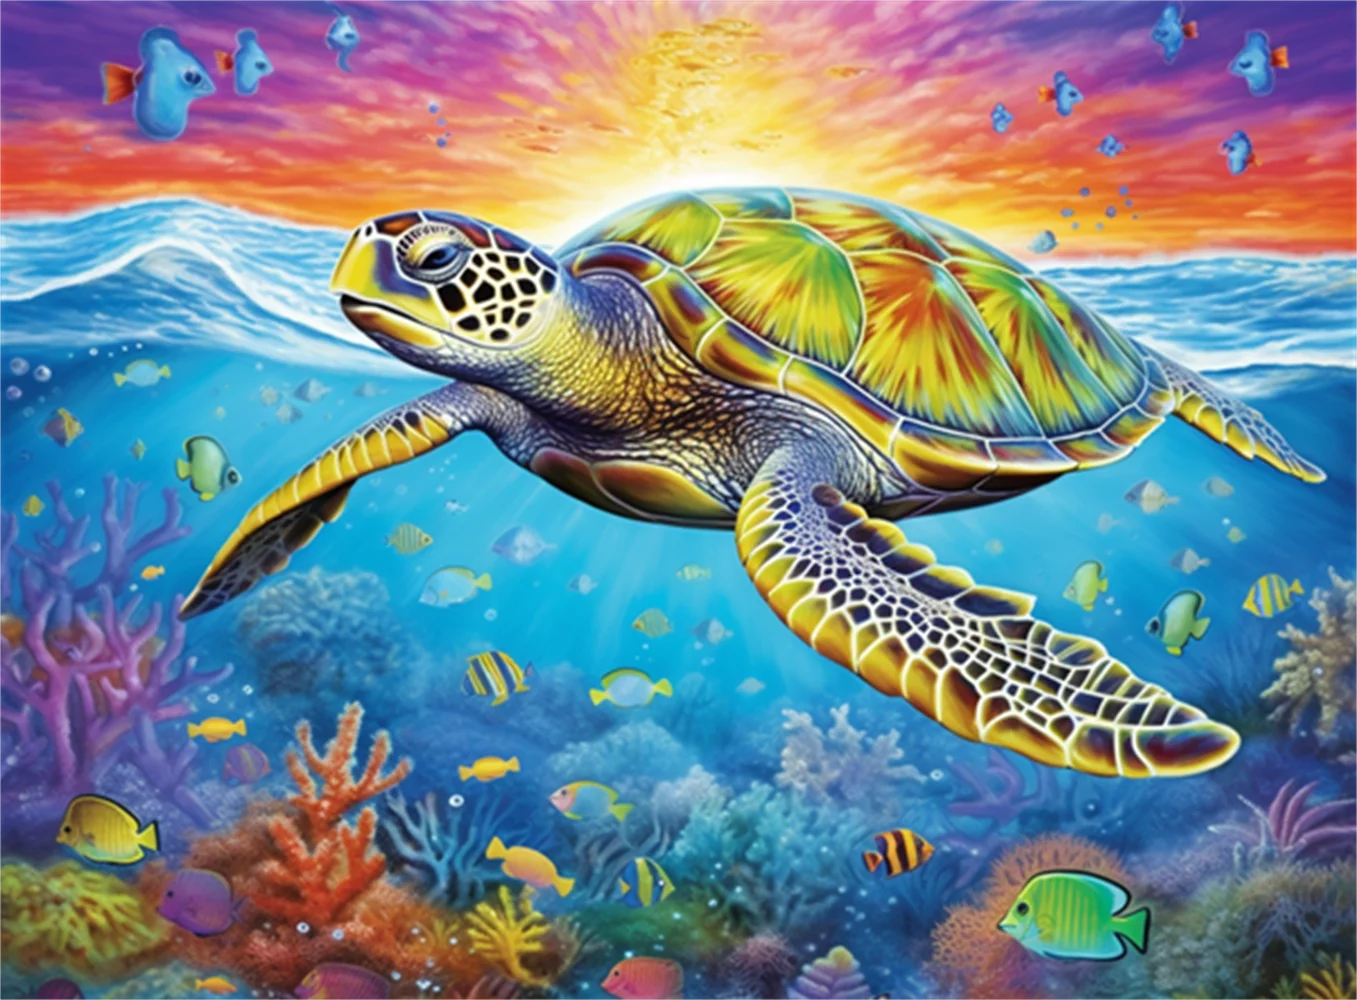 

Puzzles for adults and Family jigsaw puzzles Swim with Sea Turtles coral reef Formation wooden Game Motivational Toy Educational